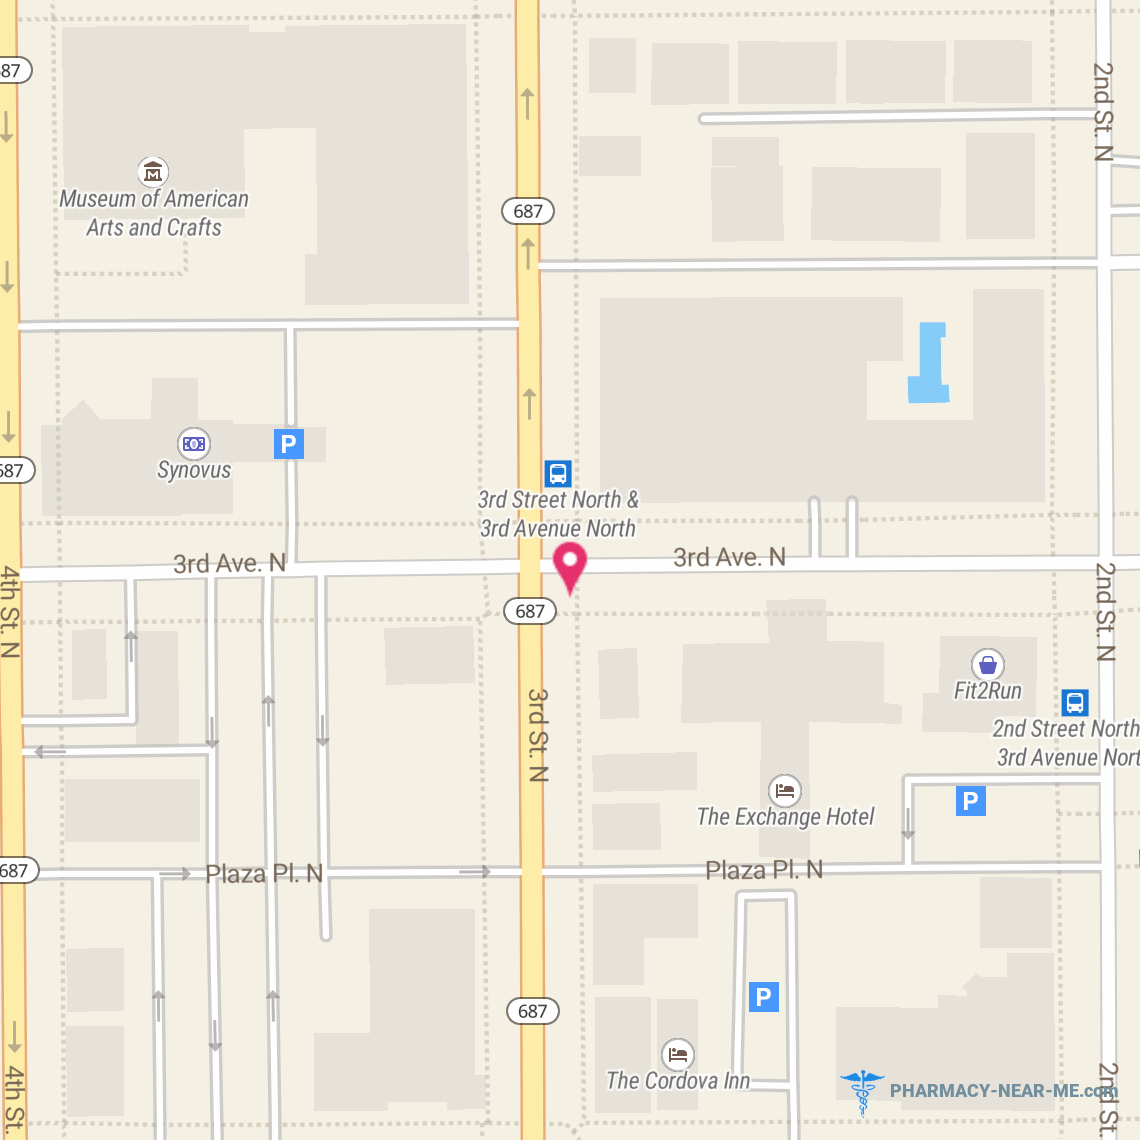 CVS PHARMACY #05234 - Pharmacy Hours, Phone, Reviews & Information: 301 3rd Street South, St. Petersburg, Florida 33701, United States